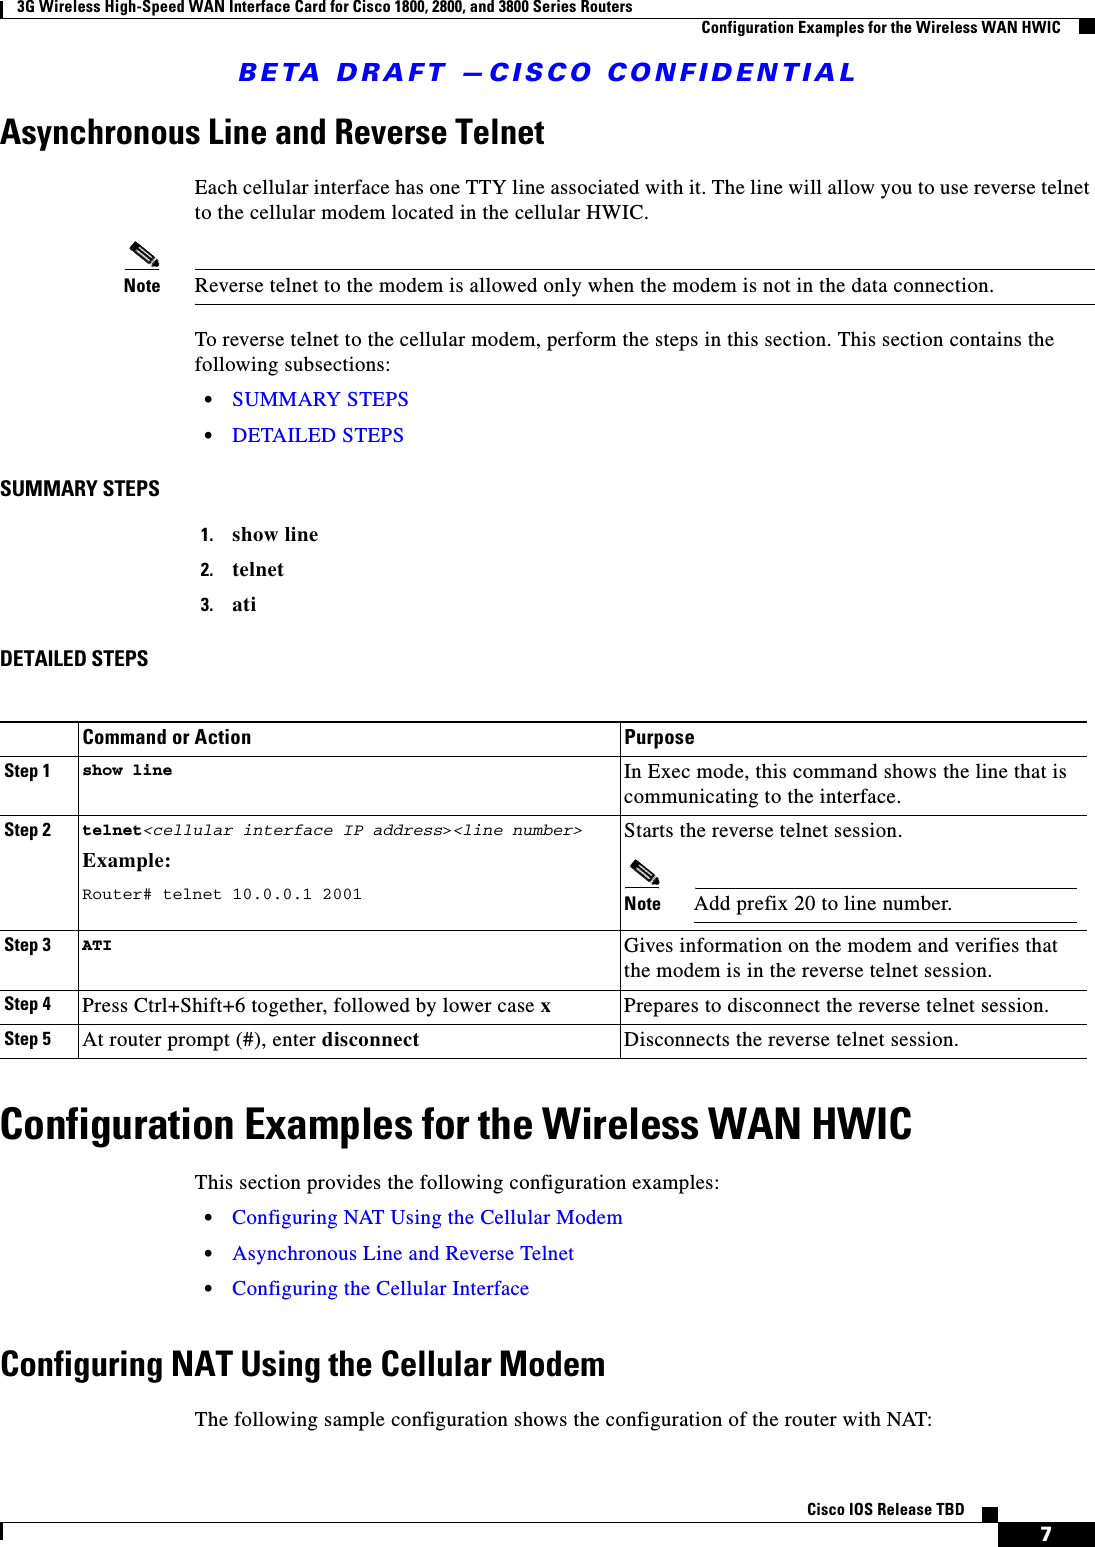 BETA DRAFT —CISCO CONFIDENTIAL3G Wireless High-Speed WAN Interface Card for Cisco 1800, 2800, and 3800 Series RoutersConfiguration Examples for the Wireless WAN HWIC7Cisco IOS Release TBDAsynchronous Line and Reverse TelnetEach cellular interface has one TTY line associated with it. The line will allow you to use reverse telnet to the cellular modem located in the cellular HWIC.Note Reverse telnet to the modem is allowed only when the modem is not in the data connection.To reverse telnet to the cellular modem, perform the steps in this section. This section contains the following subsections:•SUMMARY STEPS•DETAILED STEPSSUMMARY STEPS1. show line2. telnet3. atiDETAILED STEPSConfiguration Examples for the Wireless WAN HWICThis section provides the following configuration examples: •Configuring NAT Using the Cellular Modem•Asynchronous Line and Reverse Telnet•Configuring the Cellular InterfaceConfiguring NAT Using the Cellular ModemThe following sample configuration shows the configuration of the router with NAT:Command or Action PurposeStep 1 show line In Exec mode, this command shows the line that is communicating to the interface.Step 2 telnet&lt;cellular interface IP address&gt;&lt;line number&gt; Example:Router# telnet 10.0.0.1 2001Starts the reverse telnet session.Note Add prefix 20 to line number.Step 3 ATI Gives information on the modem and verifies that the modem is in the reverse telnet session.Step 4 Press Ctrl+Shift+6 together, followed by lower case xPrepares to disconnect the reverse telnet session.Step 5 At router prompt (#), enter disconnect Disconnects the reverse telnet session.